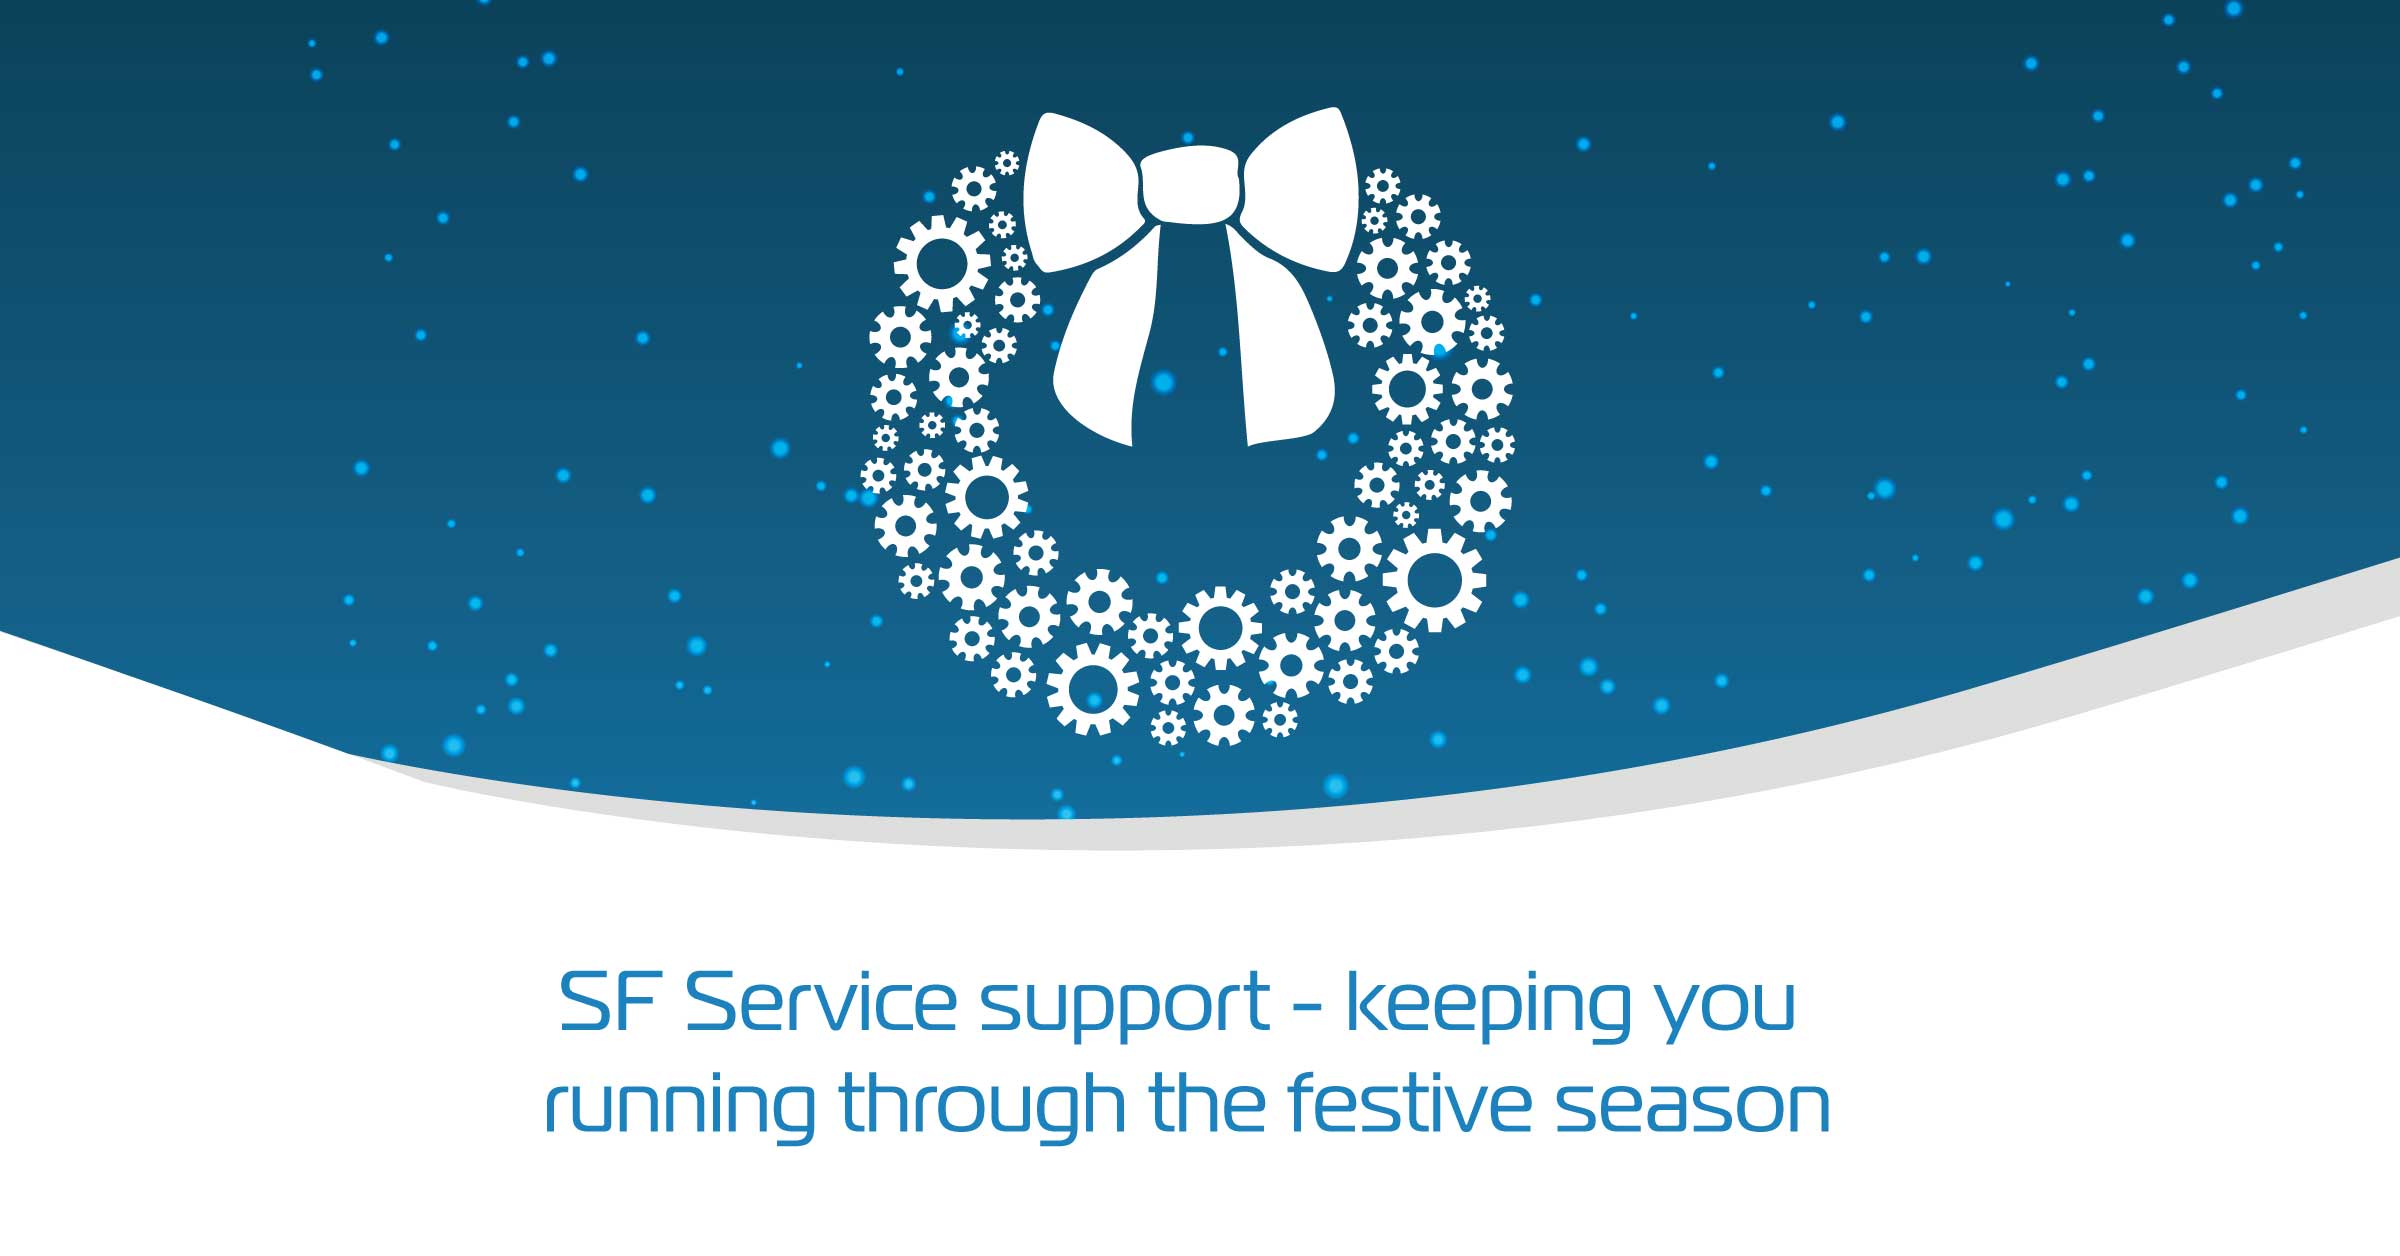 SF Engineering Support Over the Christmas and New Year Period